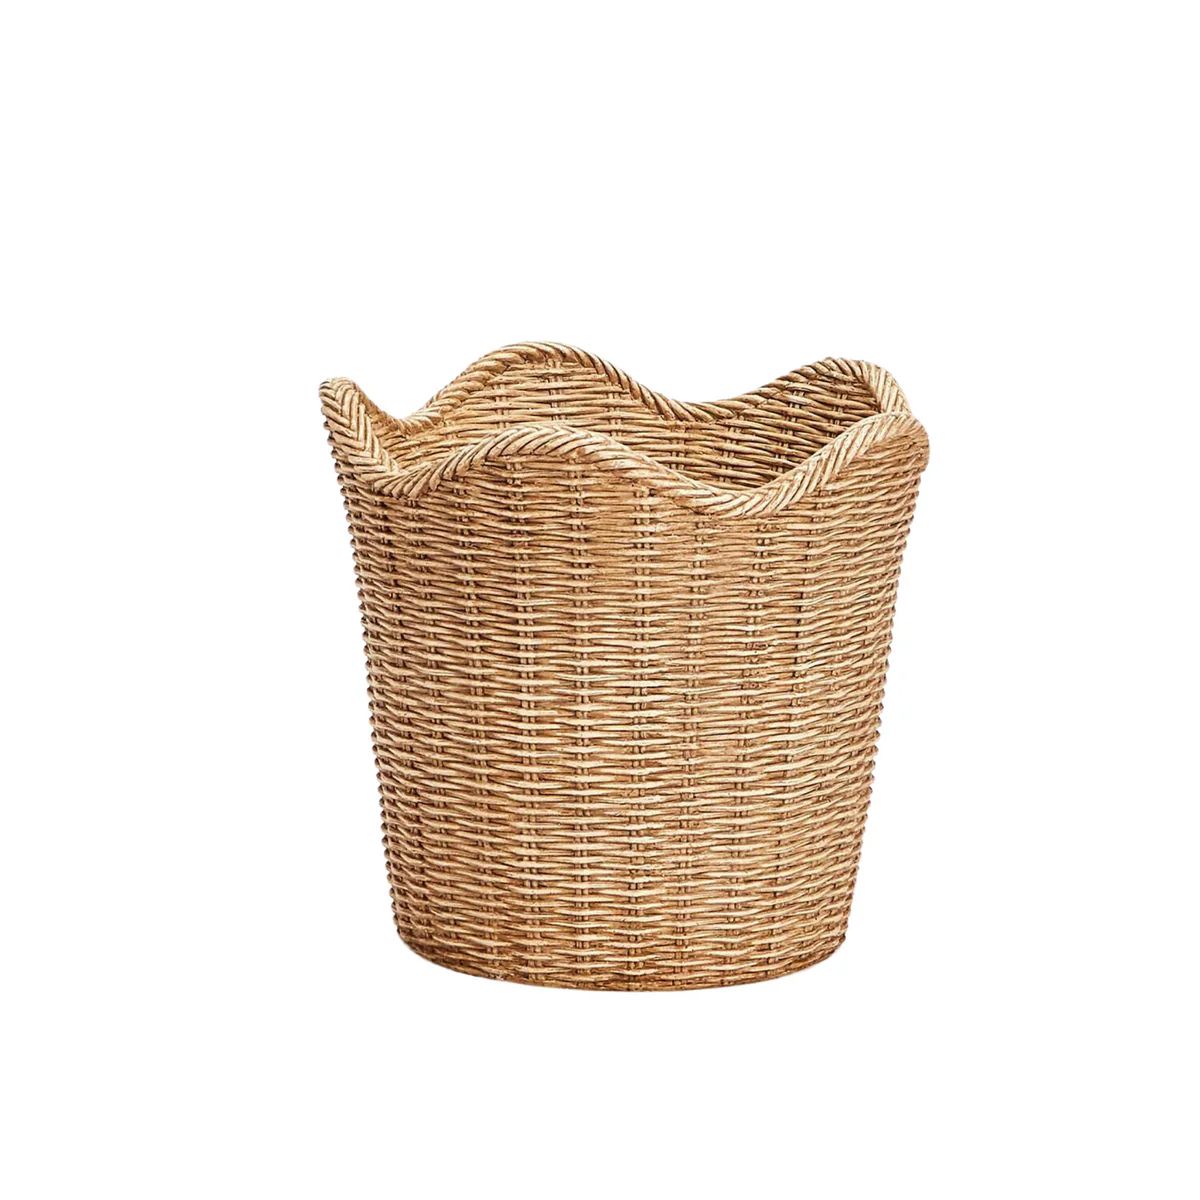 Scalloped Edge Basket Weave Pattern Cachepot | The Well Appointed House, LLC